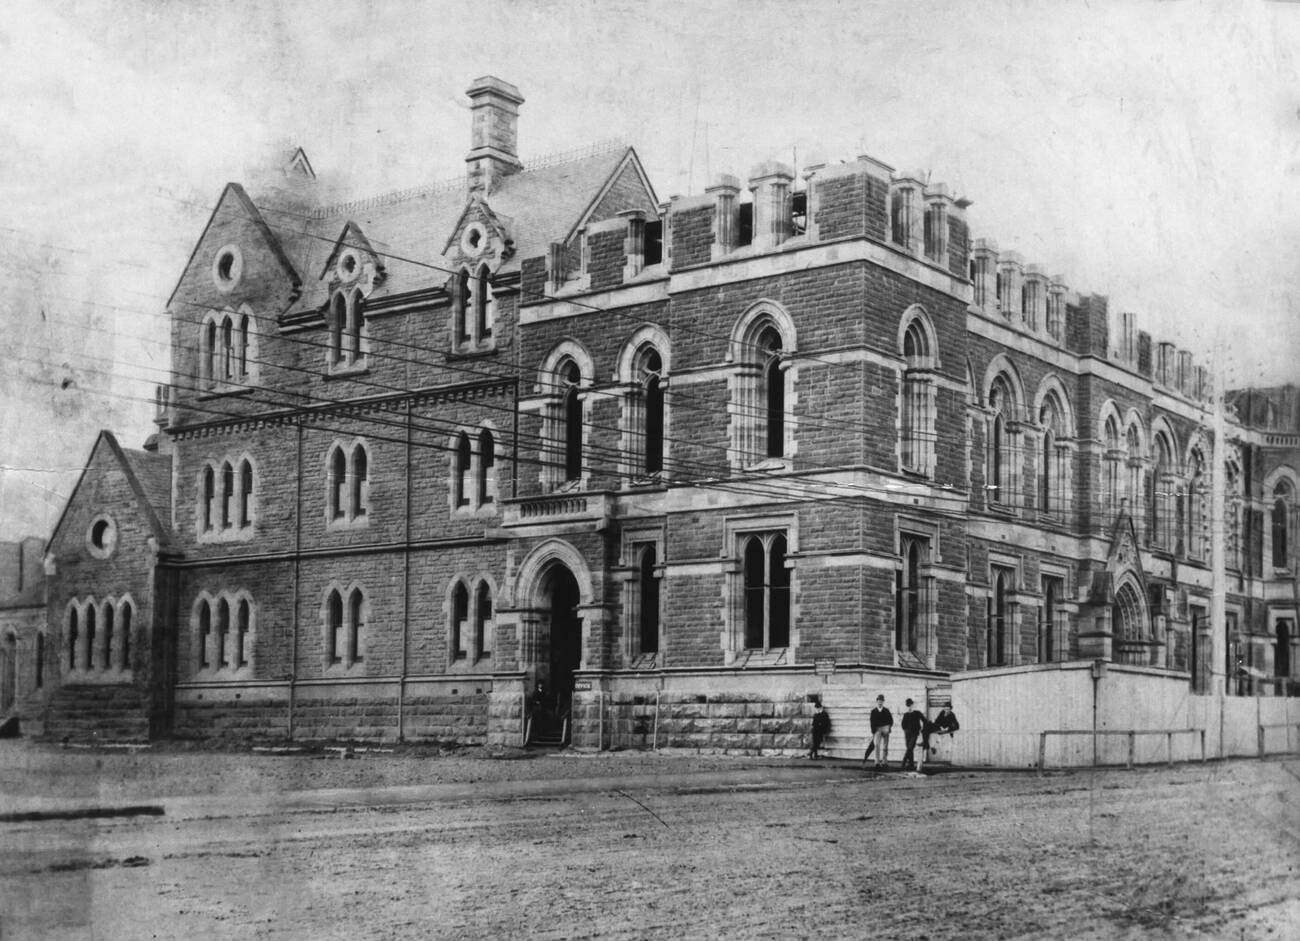 Construction of the Working Men's College of Melbourne, 1887